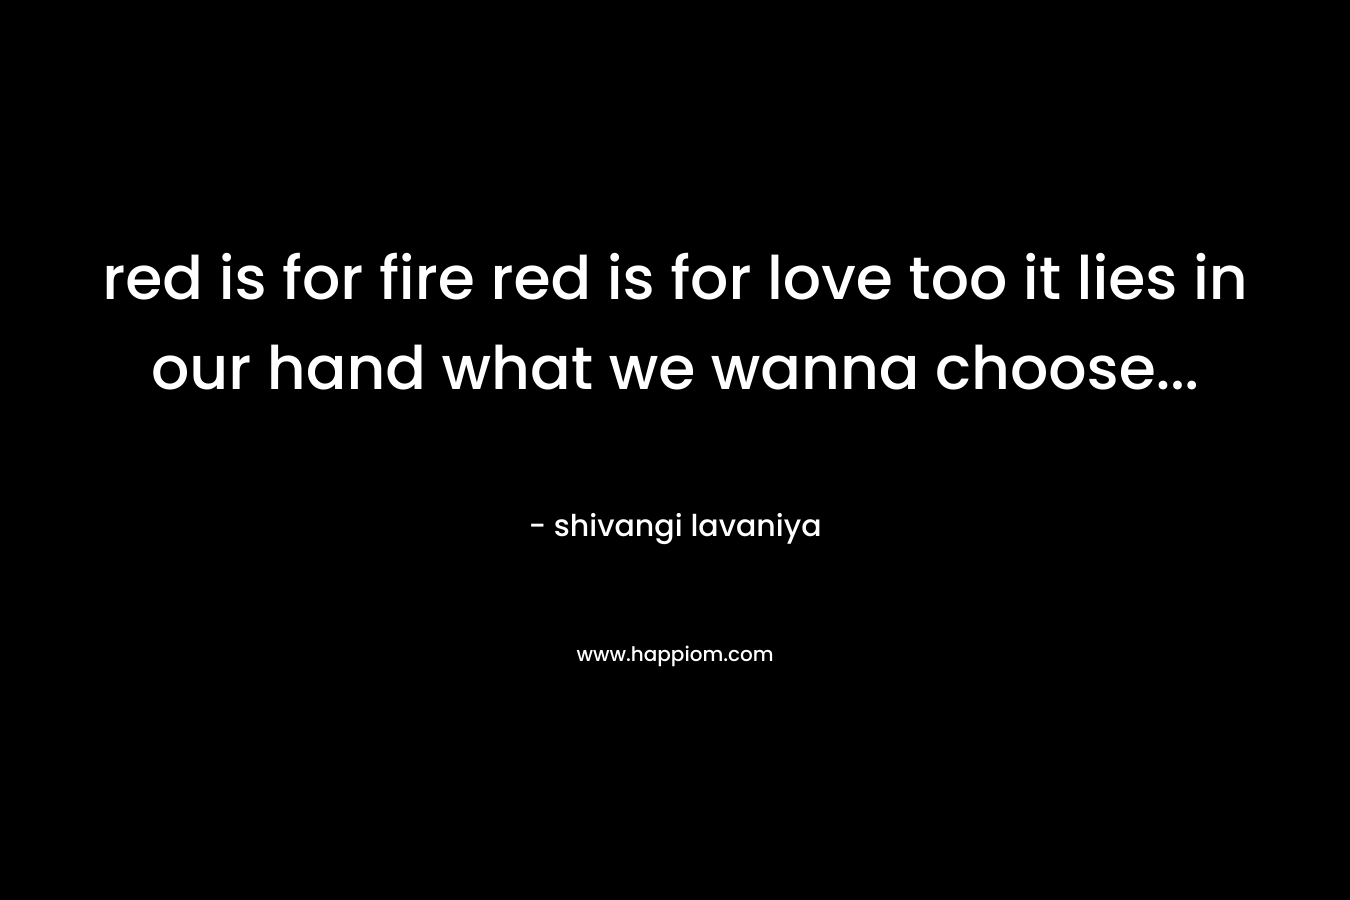 red is for fire red is for love too it lies in our hand what we wanna choose...